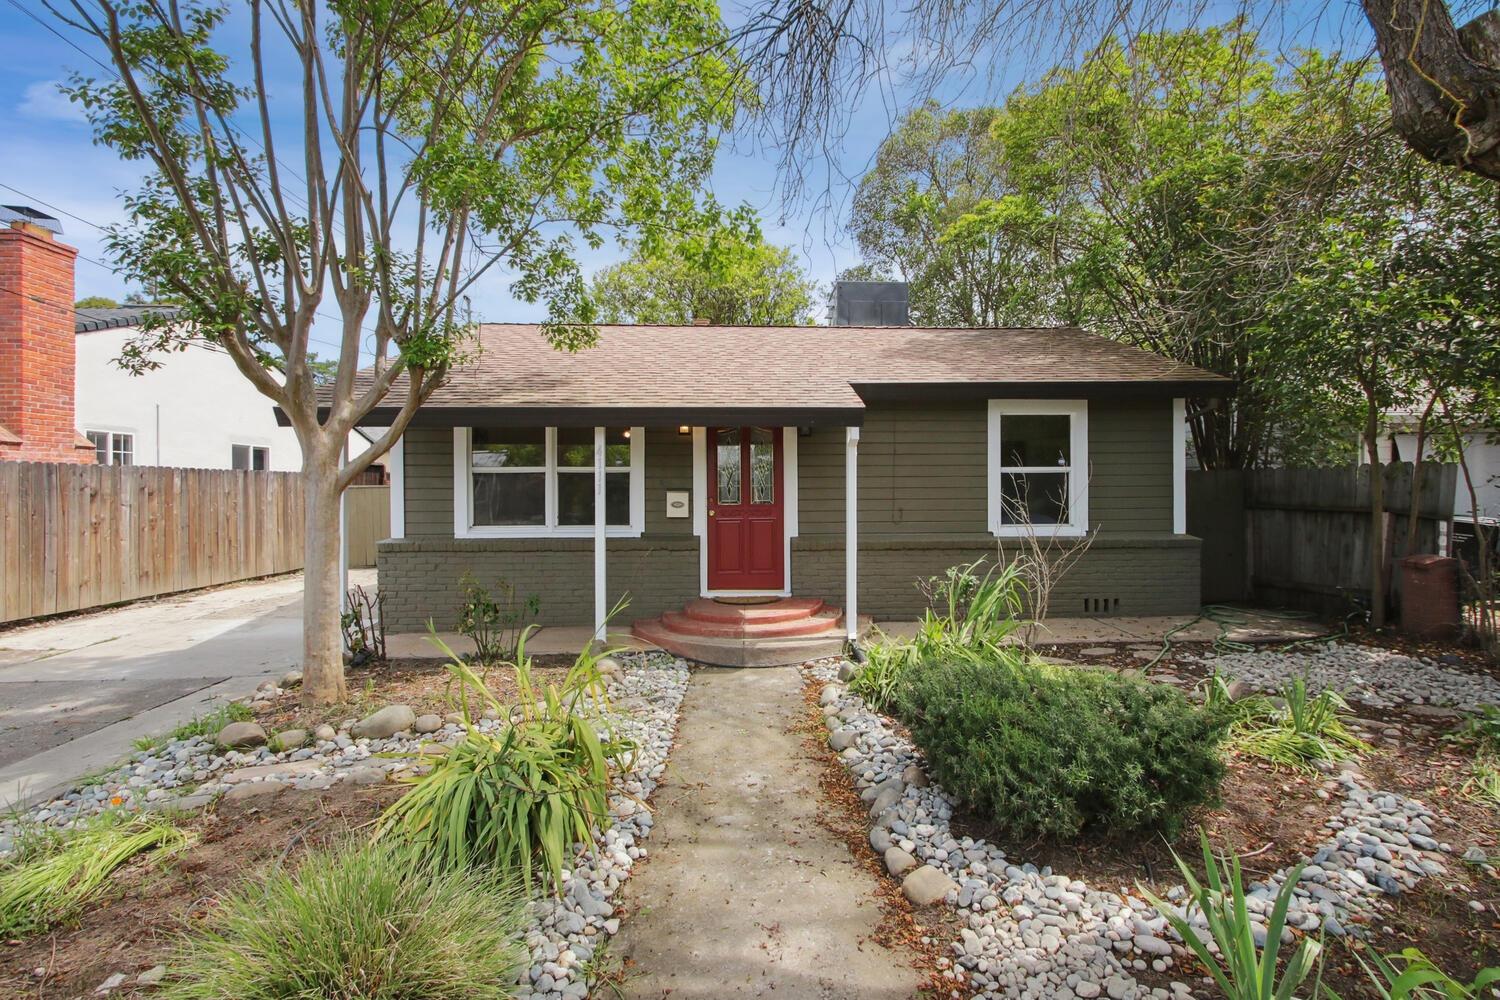 Welcome home to a charming cottage in the heart of Sacramento's North City Farms neighborhood. This 